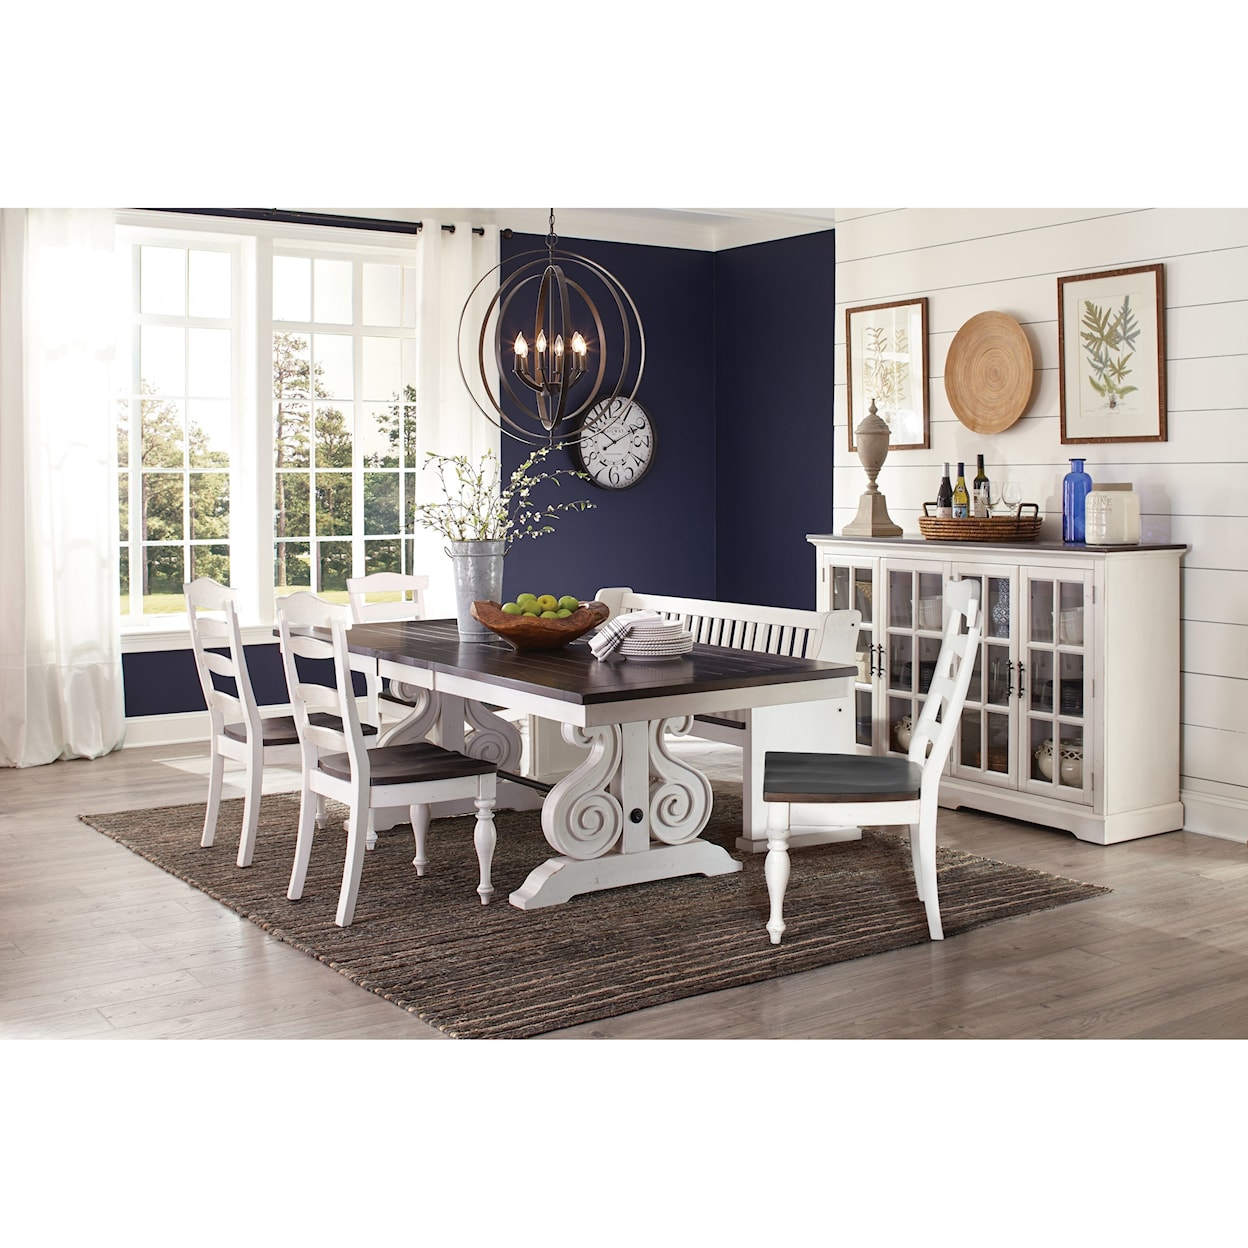 Sunny Designs Carriage House Formal Dining Room Group